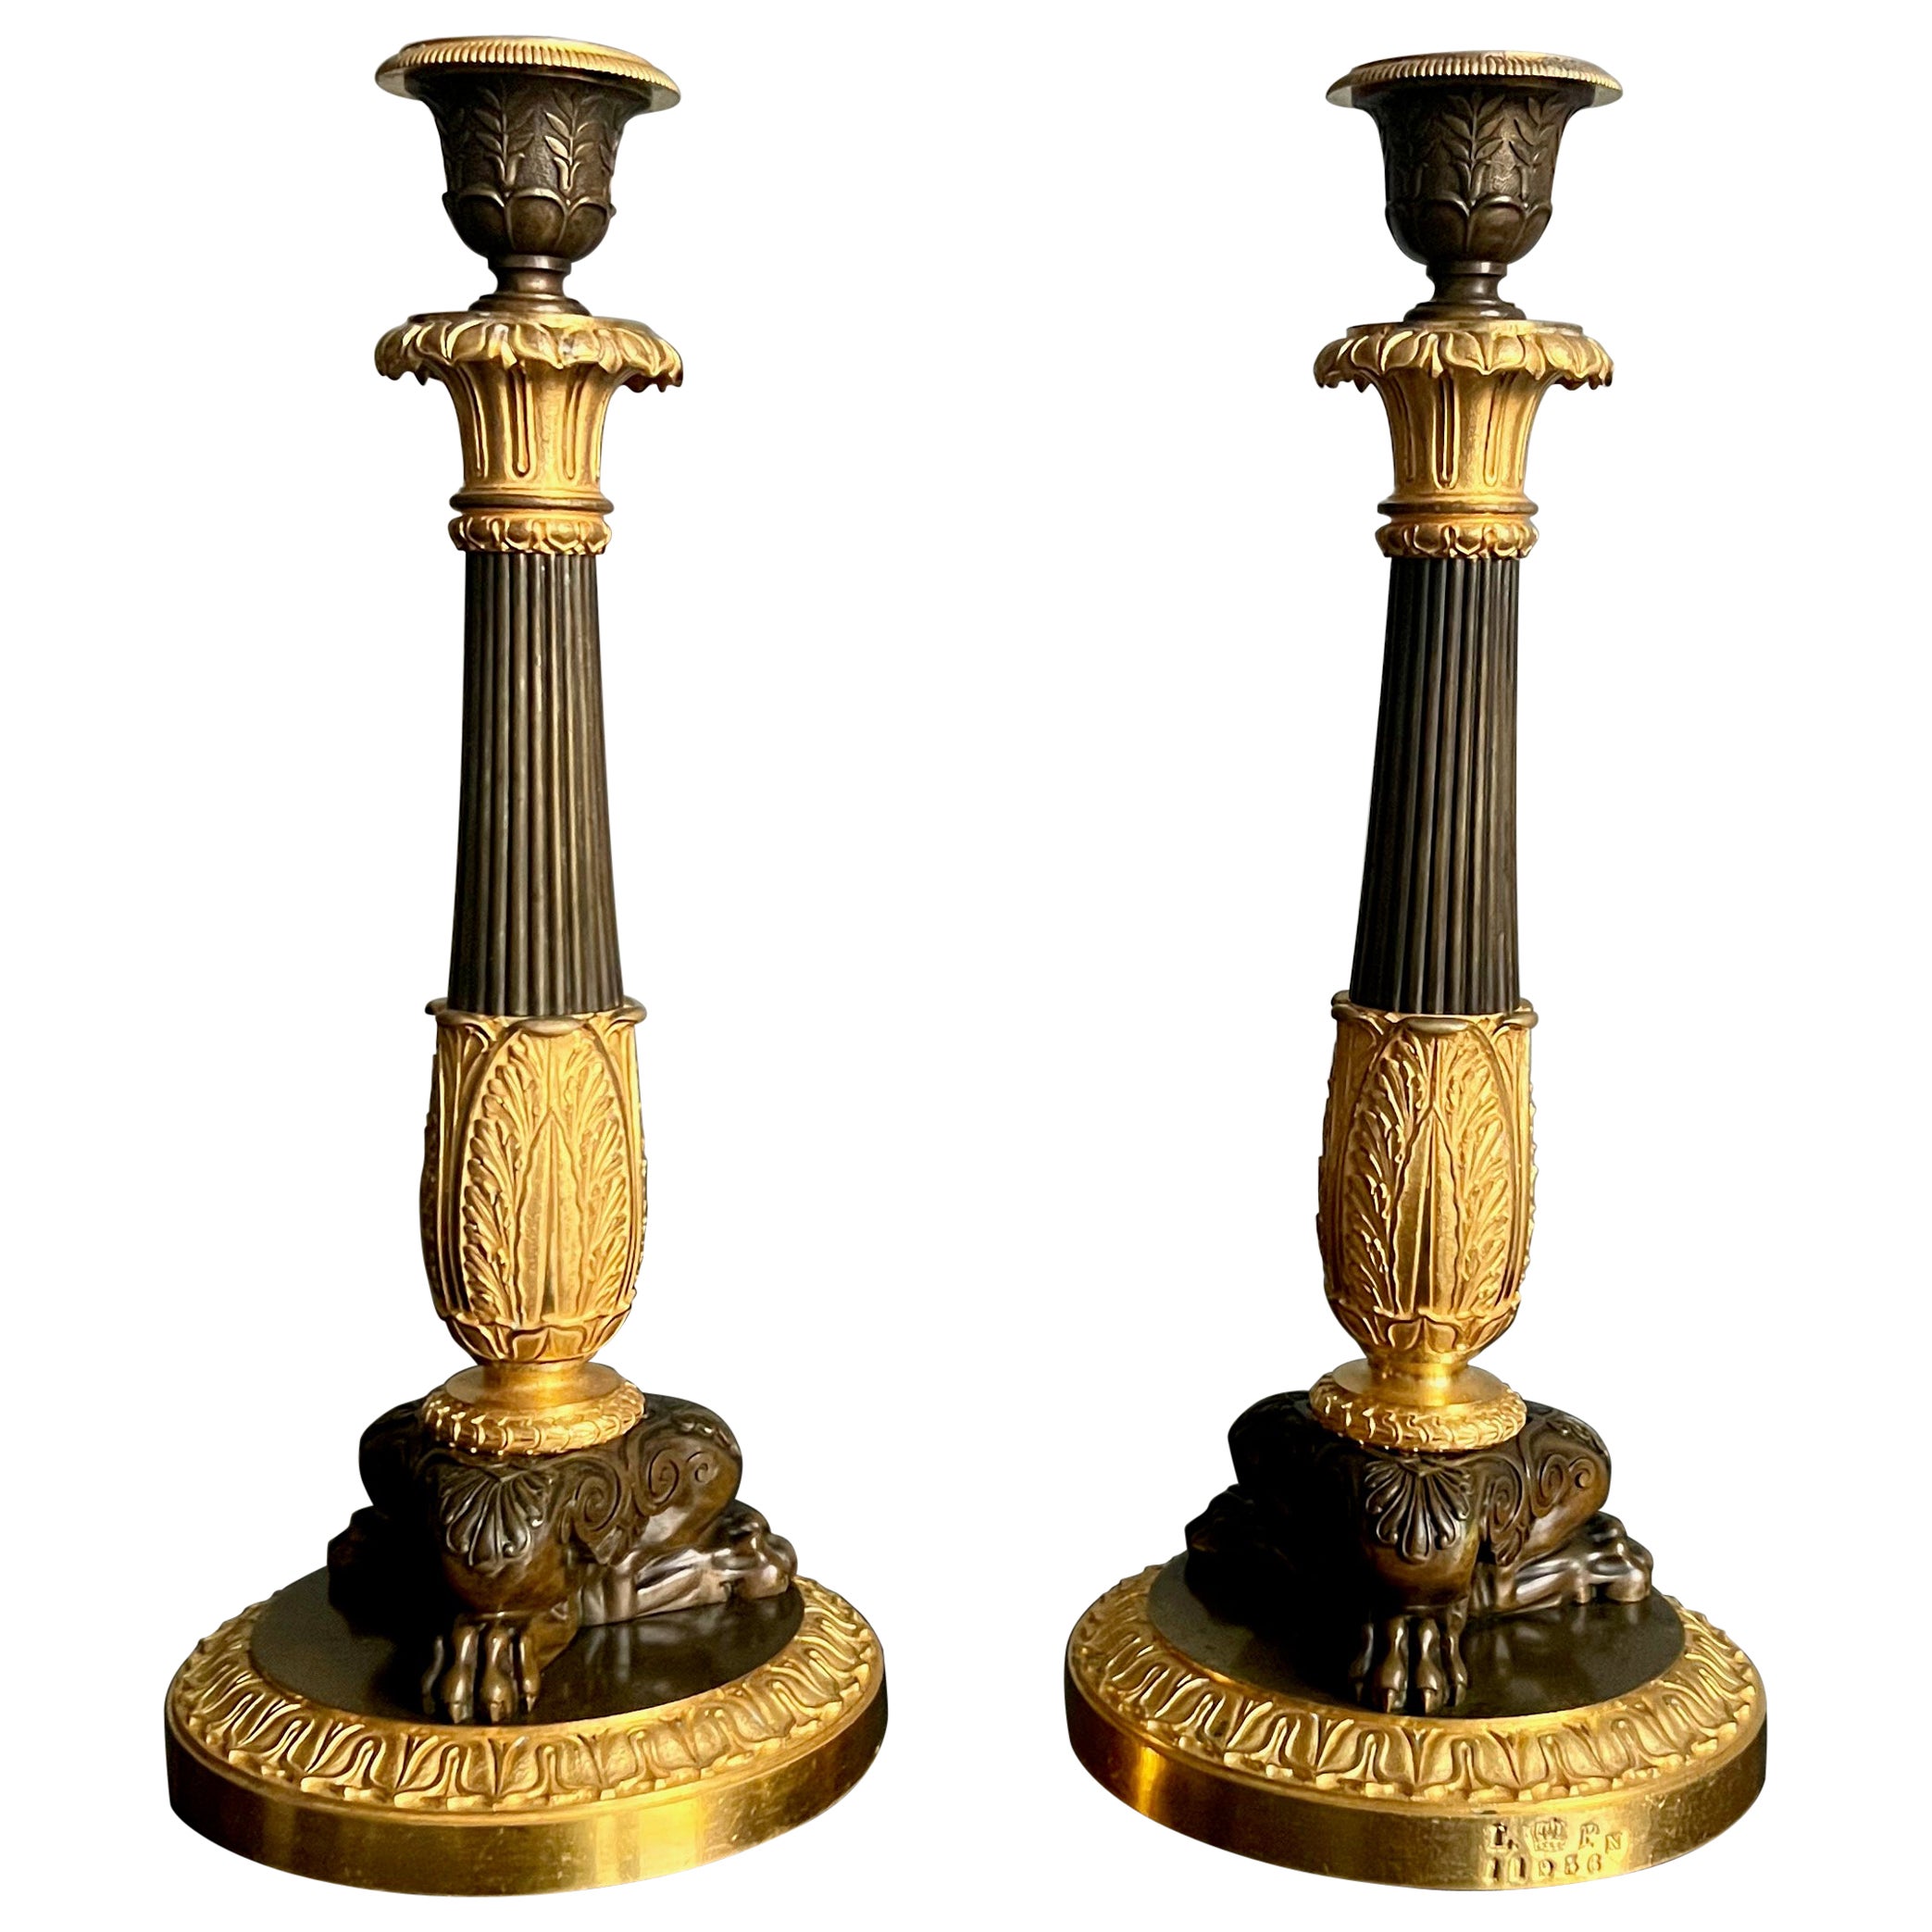 Pair of Royal Candlesticks from King Louis-Philippe's Chateau De Neuilly